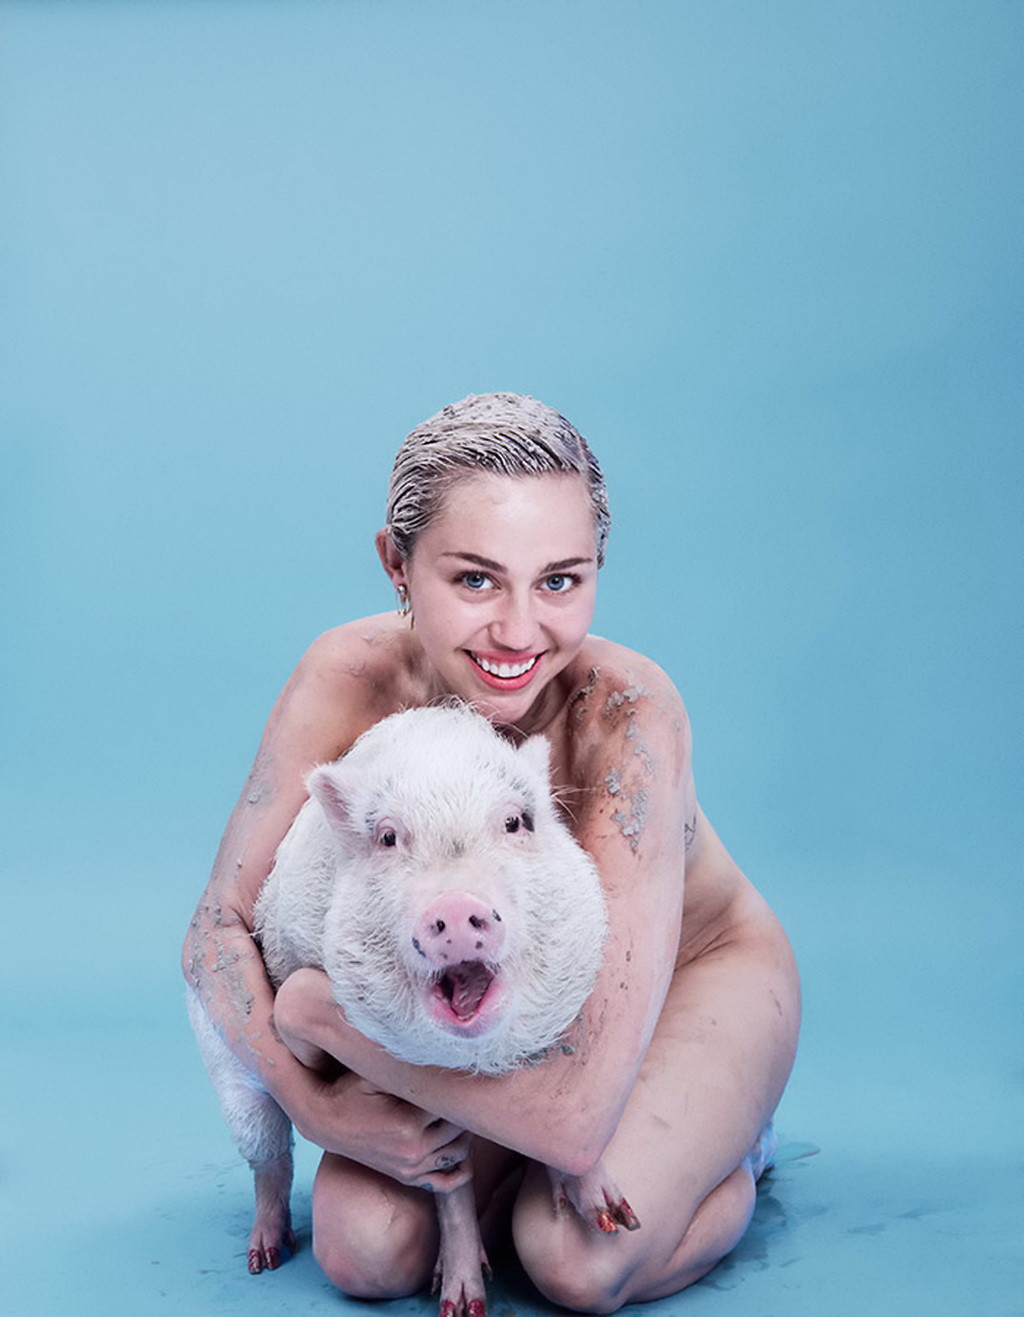 Miley Cyrus showing off her bare boobs and pussy #75149975